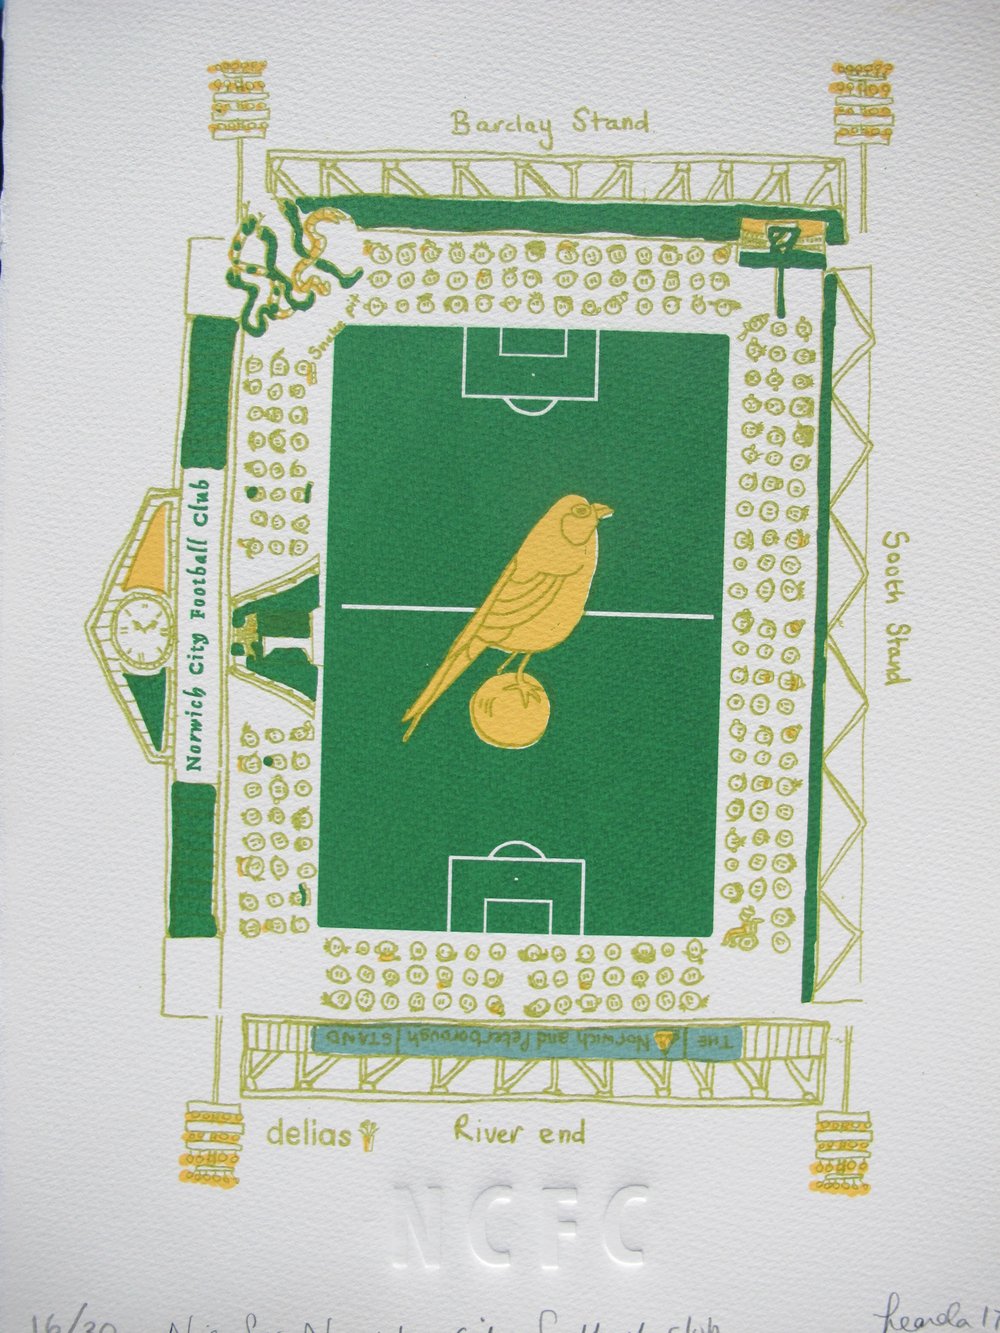 Image of N is for Norwich Football Club